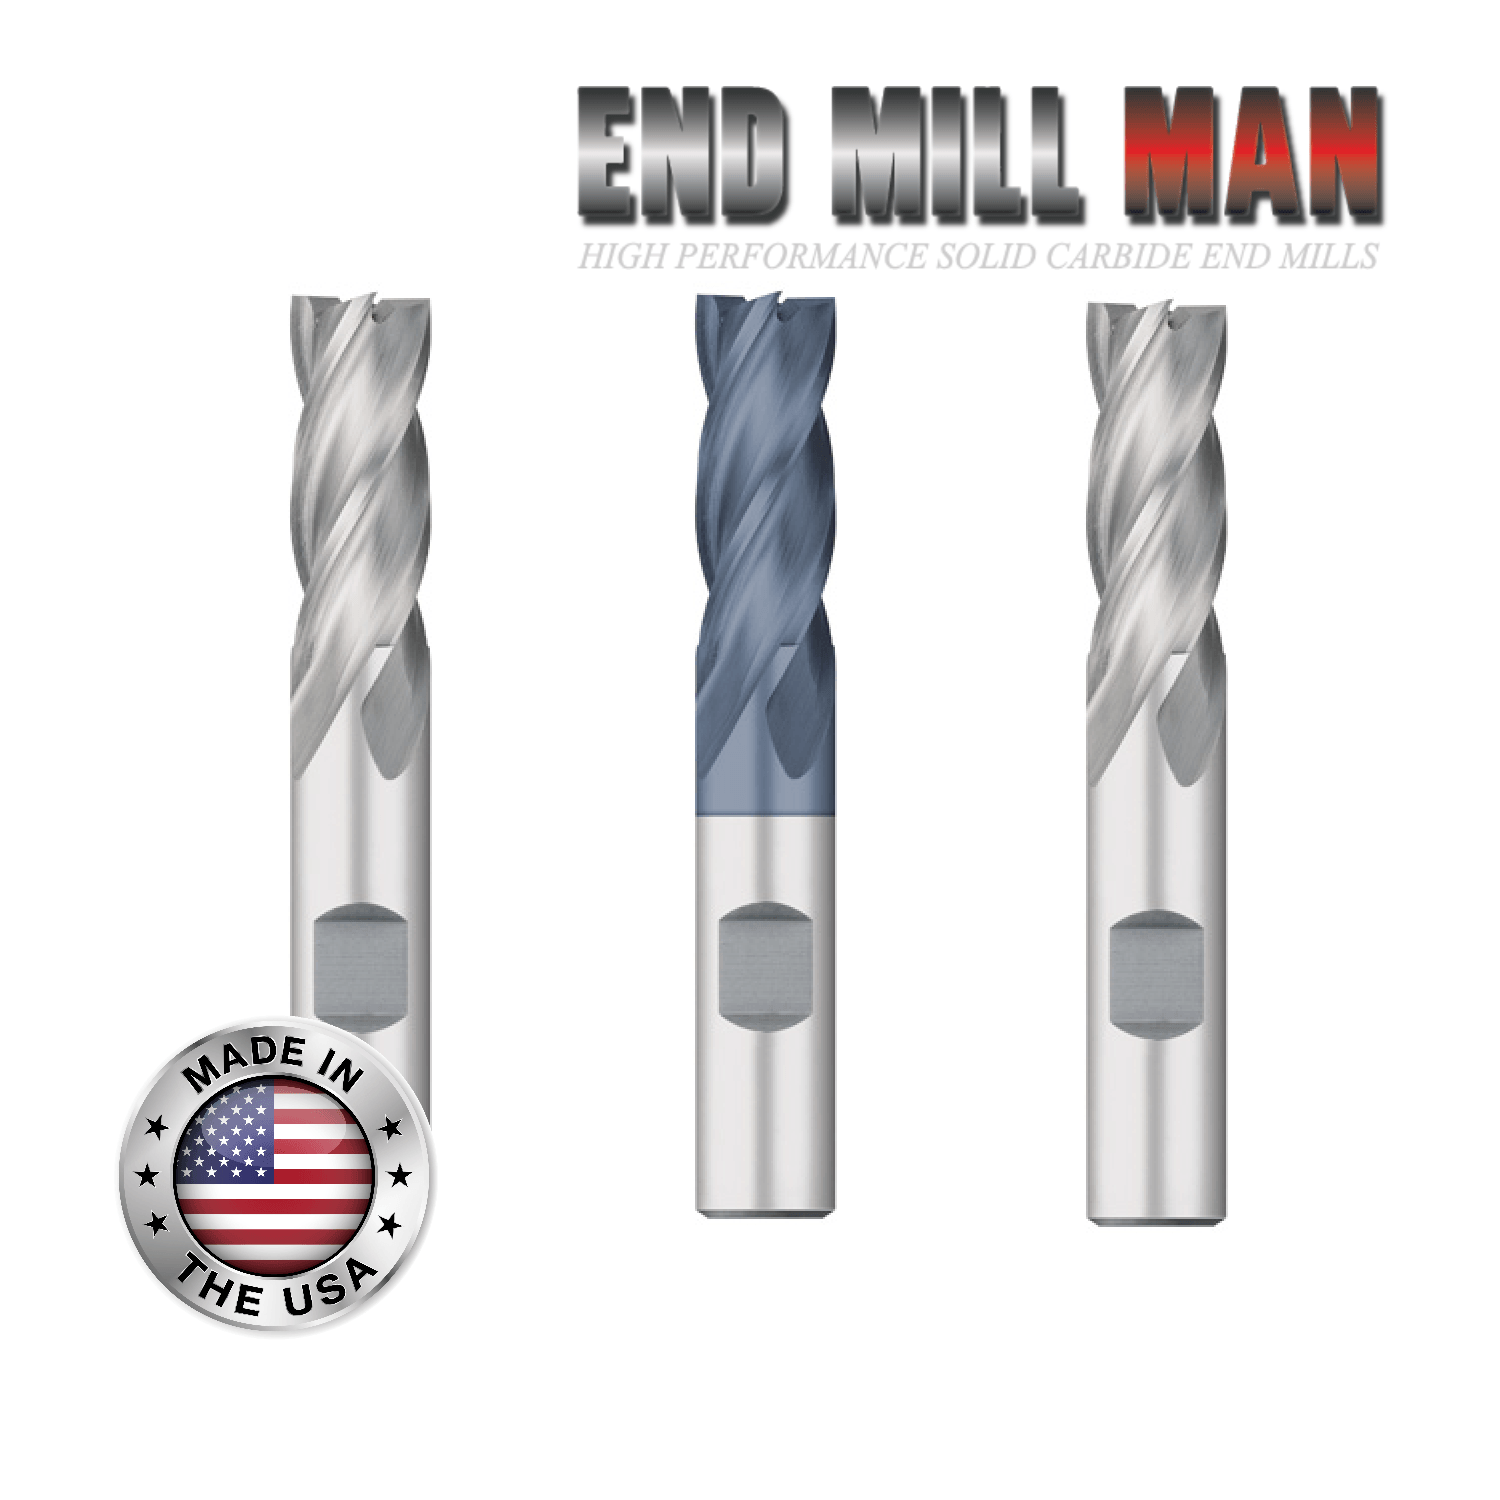 13/32" x 3/4" LOC (3 Pack) HSS 4 Flute End Mills (3/8" Shanks) - The End Mill Store 